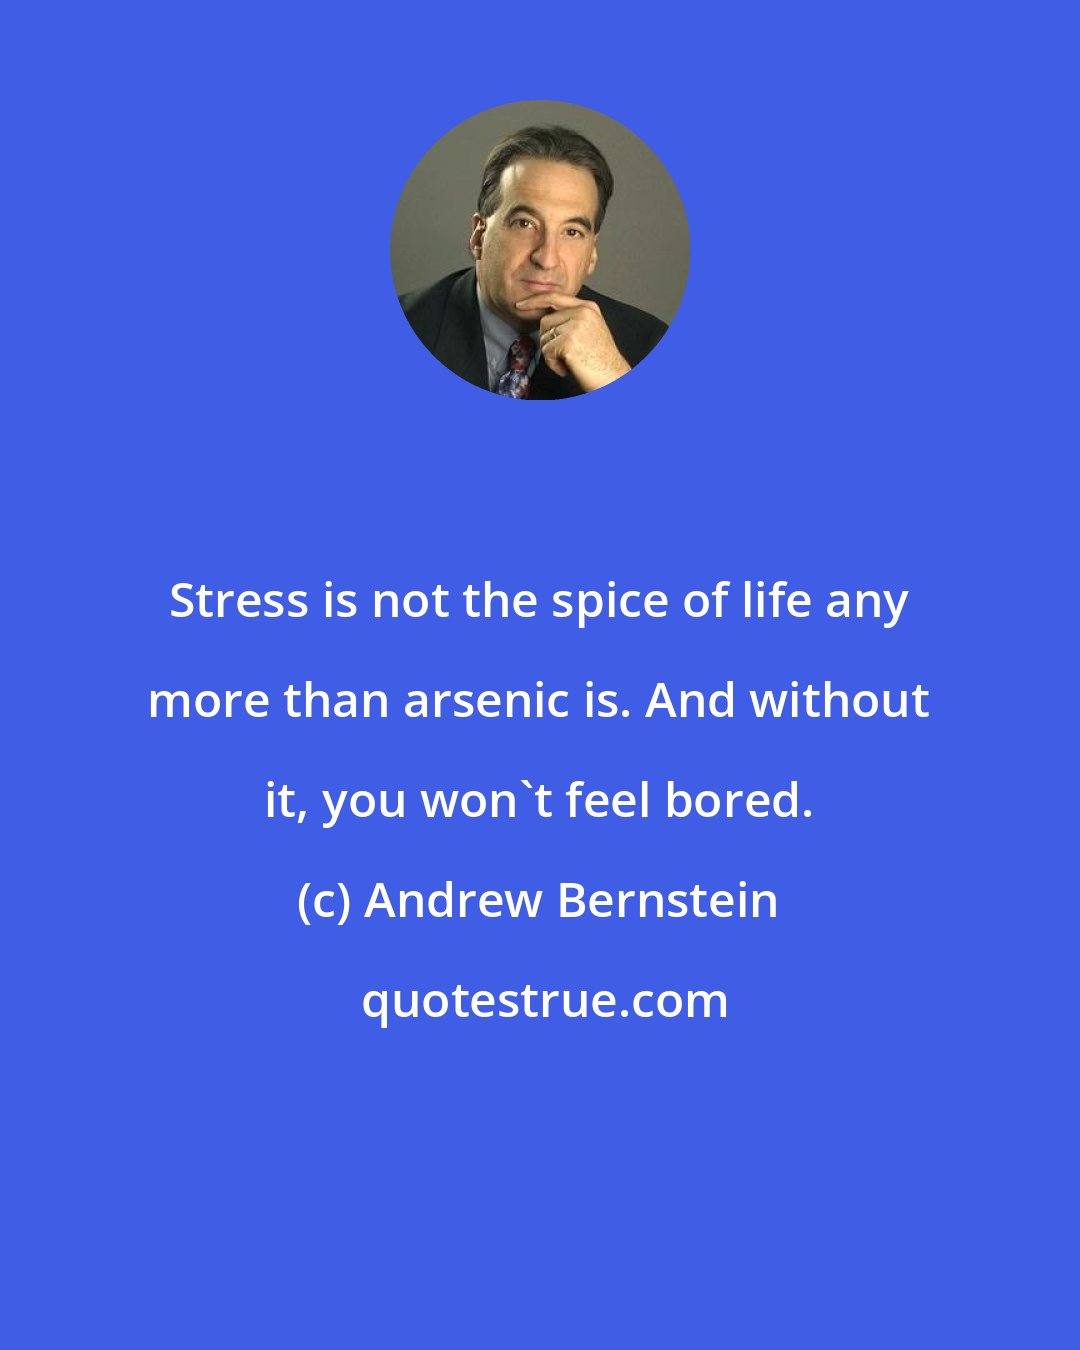 Andrew Bernstein: Stress is not the spice of life any more than arsenic is. And without it, you won't feel bored.